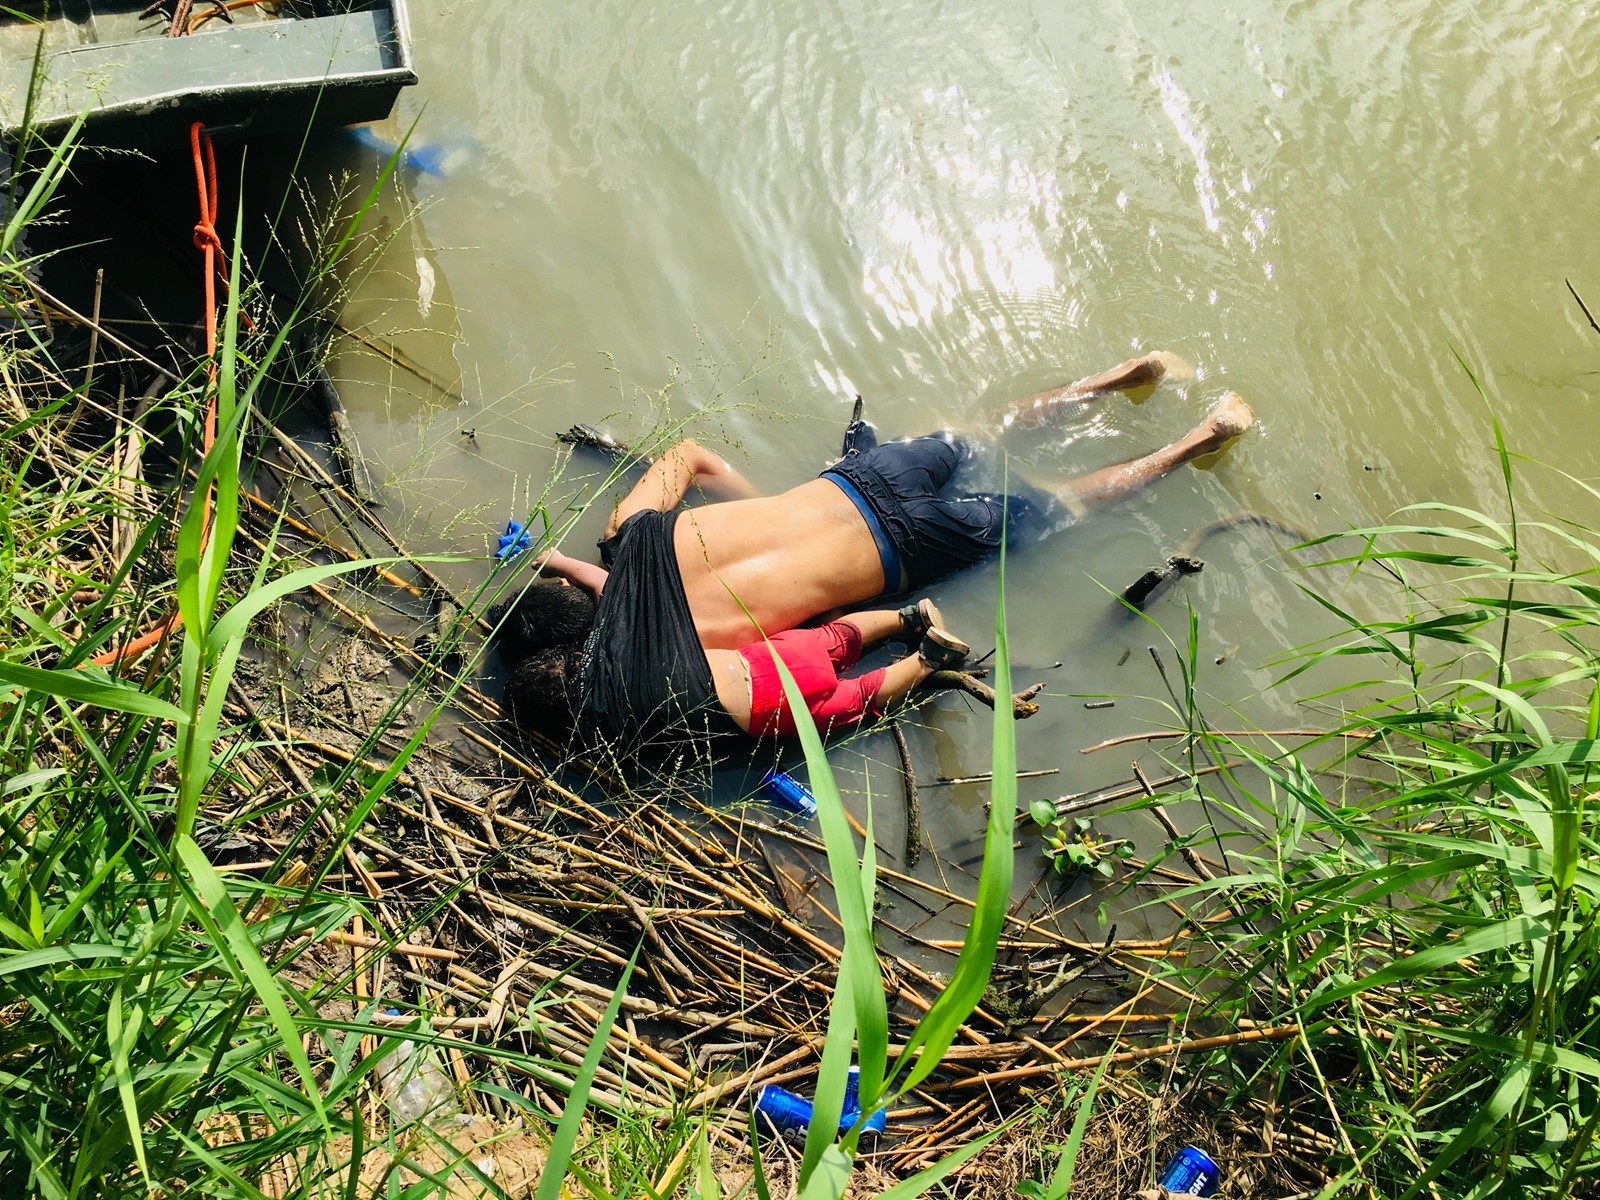 Print Uproar Over Tragedy On Rio Grande Image Of Dead Father And